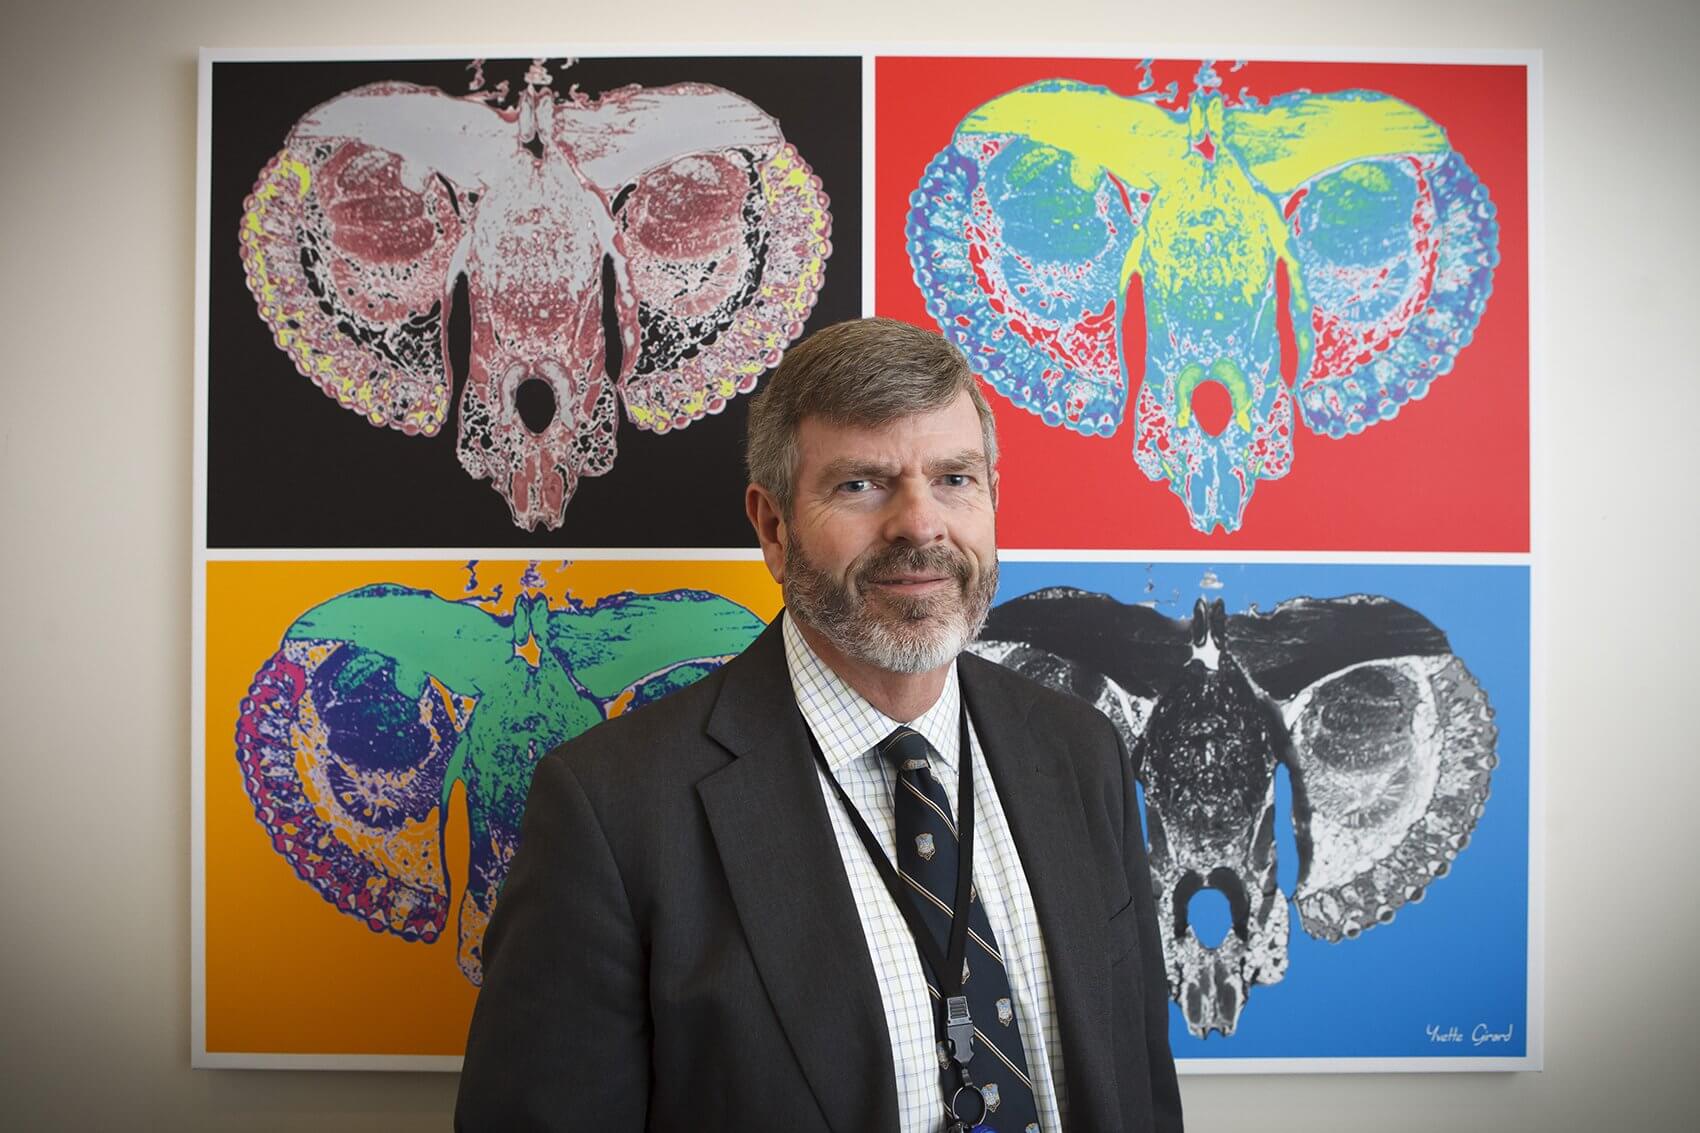 Scott Weaver, M.S., Ph.D., is the director of the UTMB Institute for Human Infections and Immunity as well as the scientific director of the Galveston National Laboratory and one of the lead members of the Global Virus Network’s Chikungunya Task Force. (Credit: Michael Stravato)